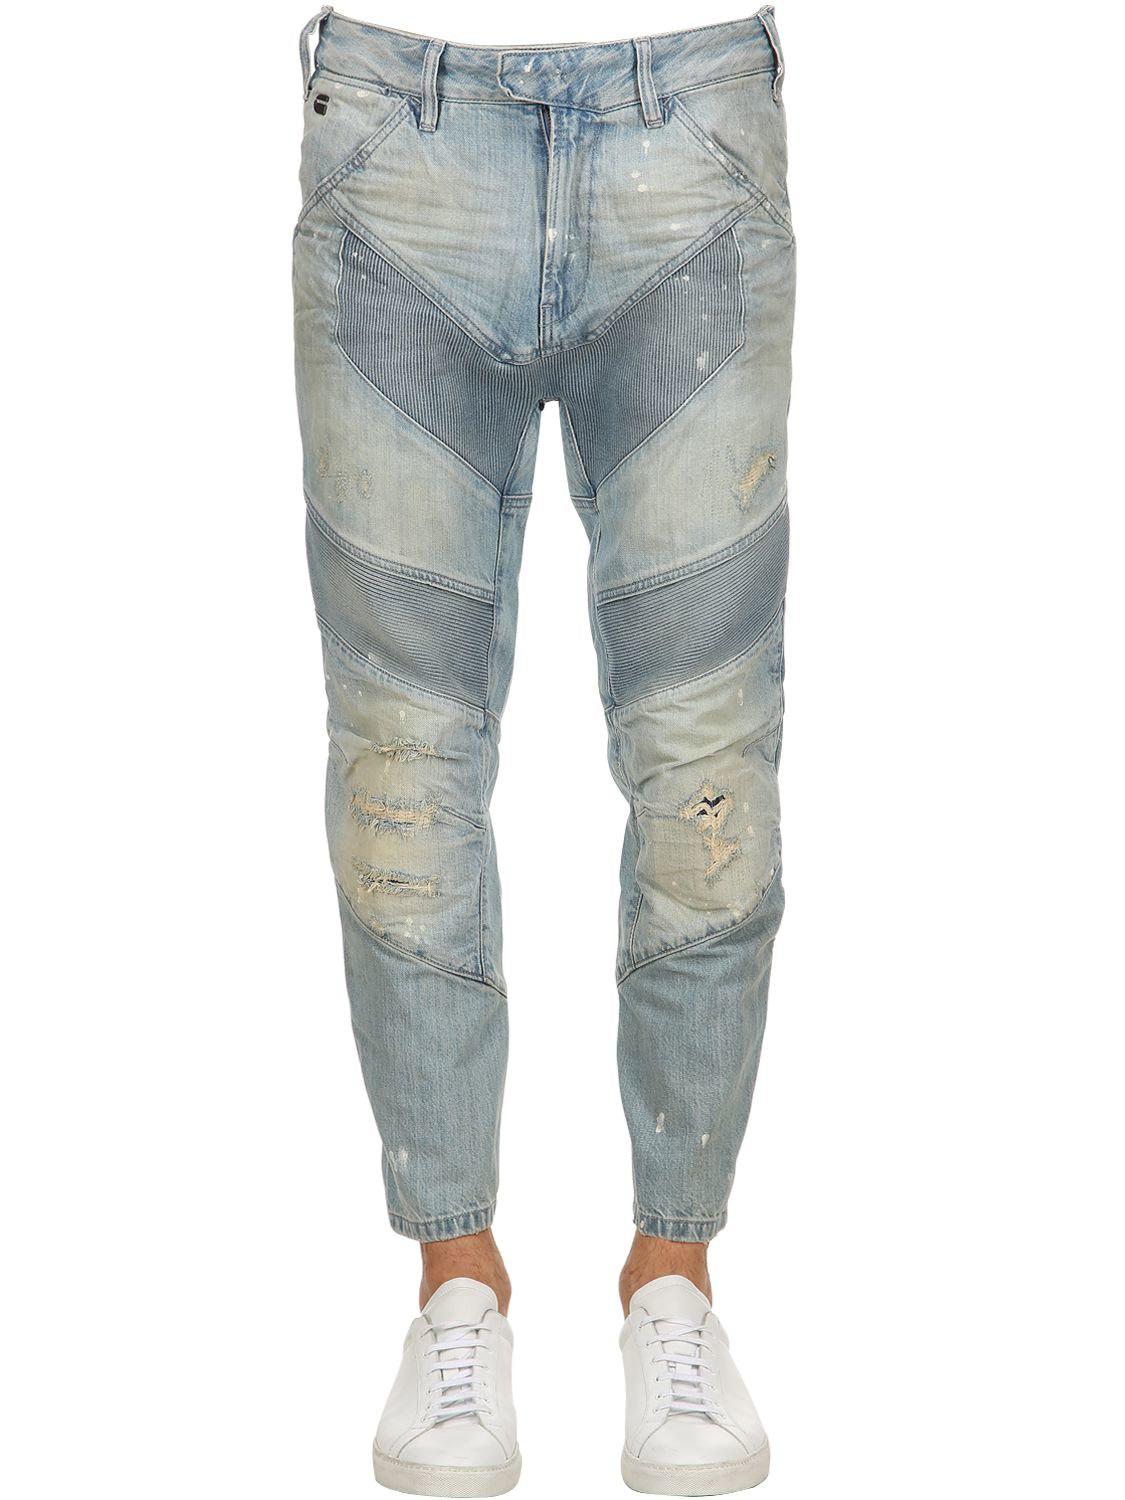 G-Star RAW Denim Motac-x 3d Relaxed Tapered Crop Jeans in Light Blue ...